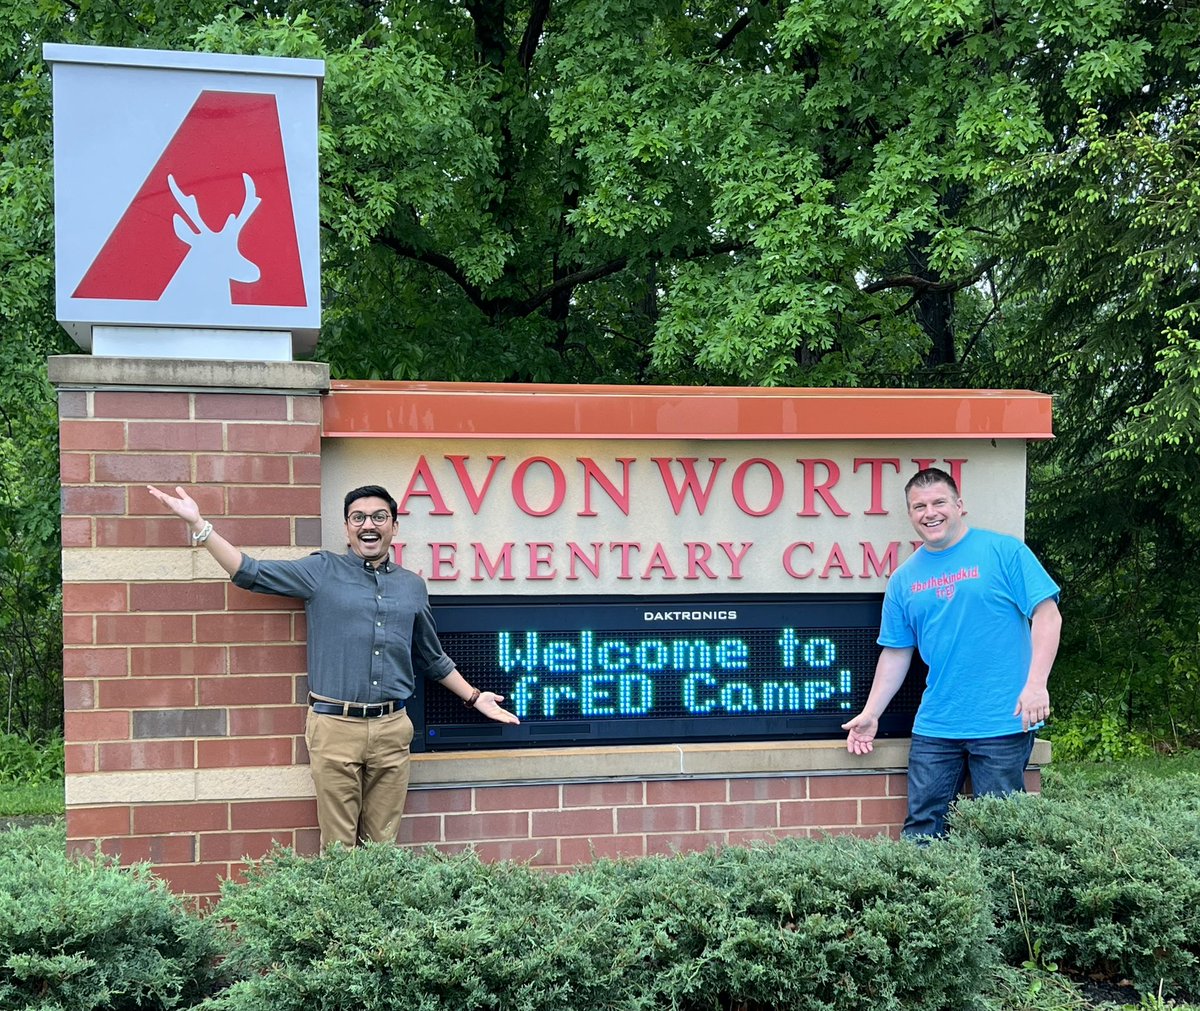 That’s a wrap! #frEDcamp just finished! Awesome day of networking and inspiration with local educators. What’s next @deepak1811? @Avonworthschool @RemakeDays @Project_Fuel @greggbehr